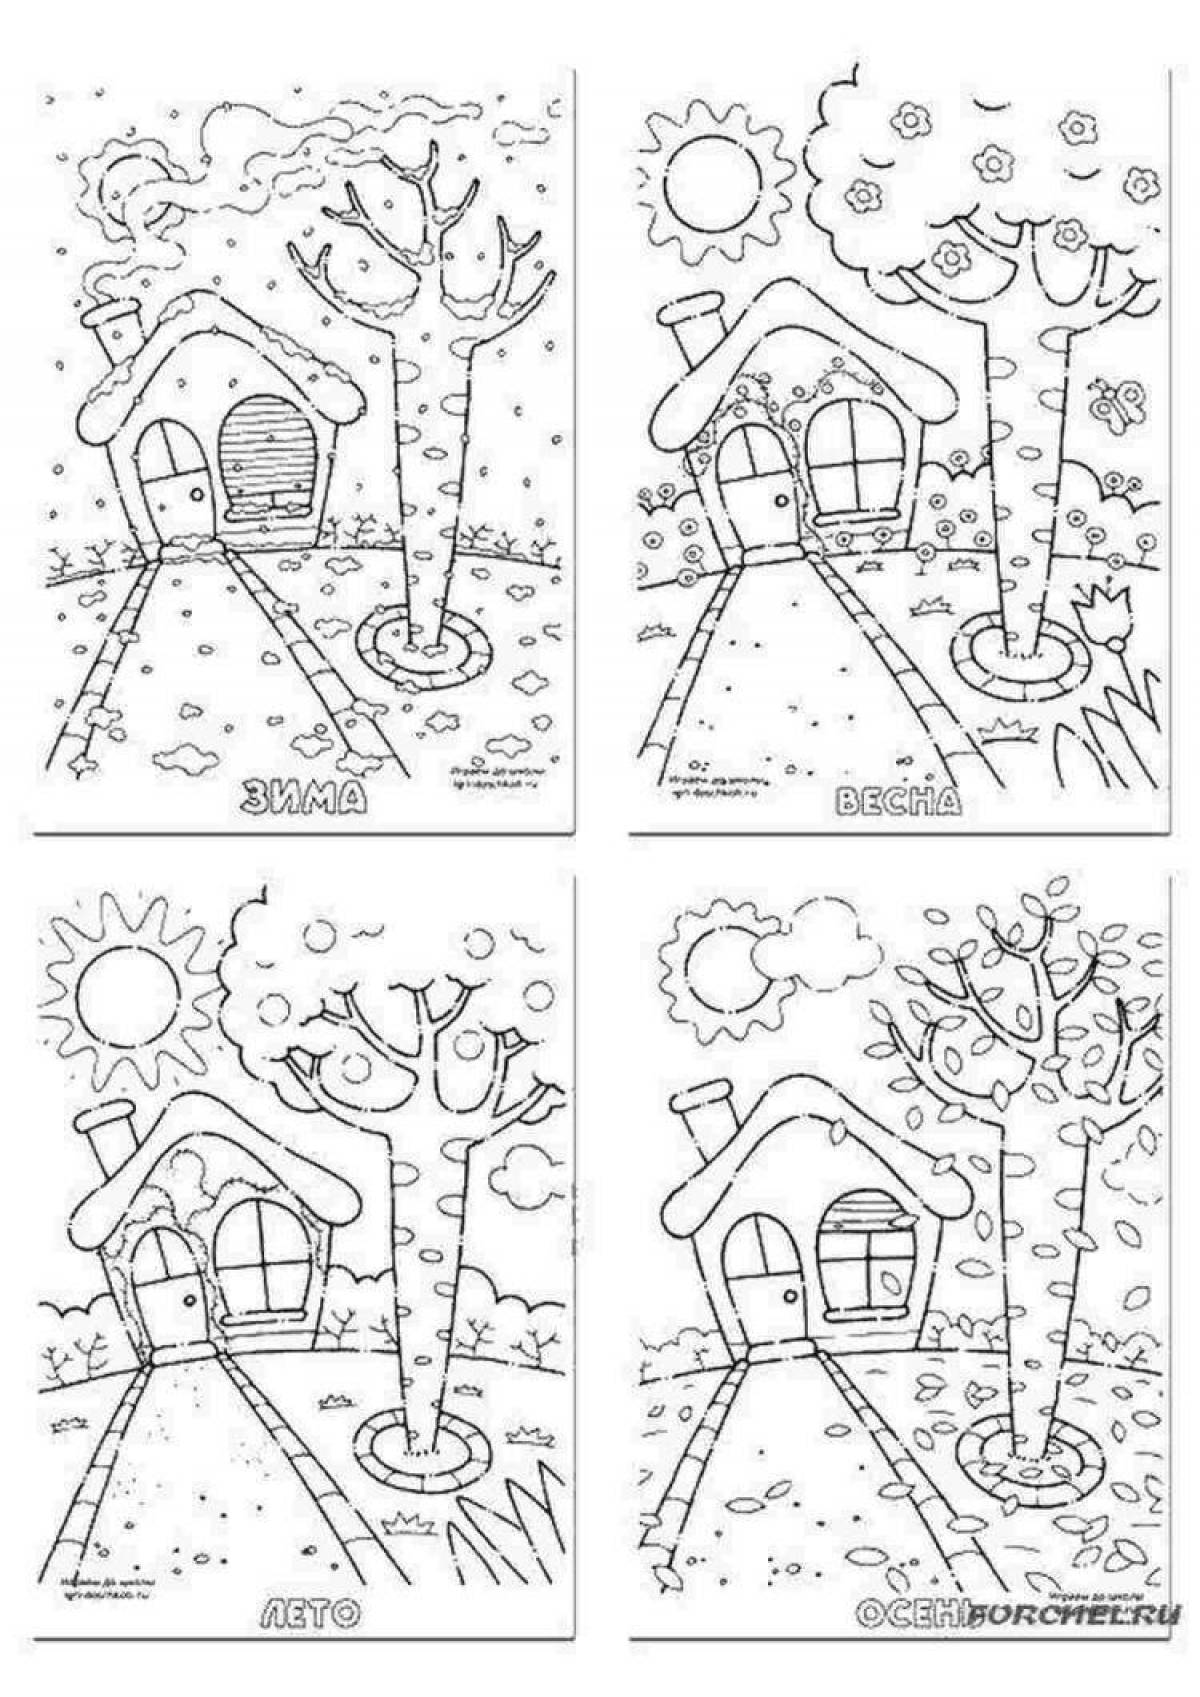 Sparkling winter months coloring book